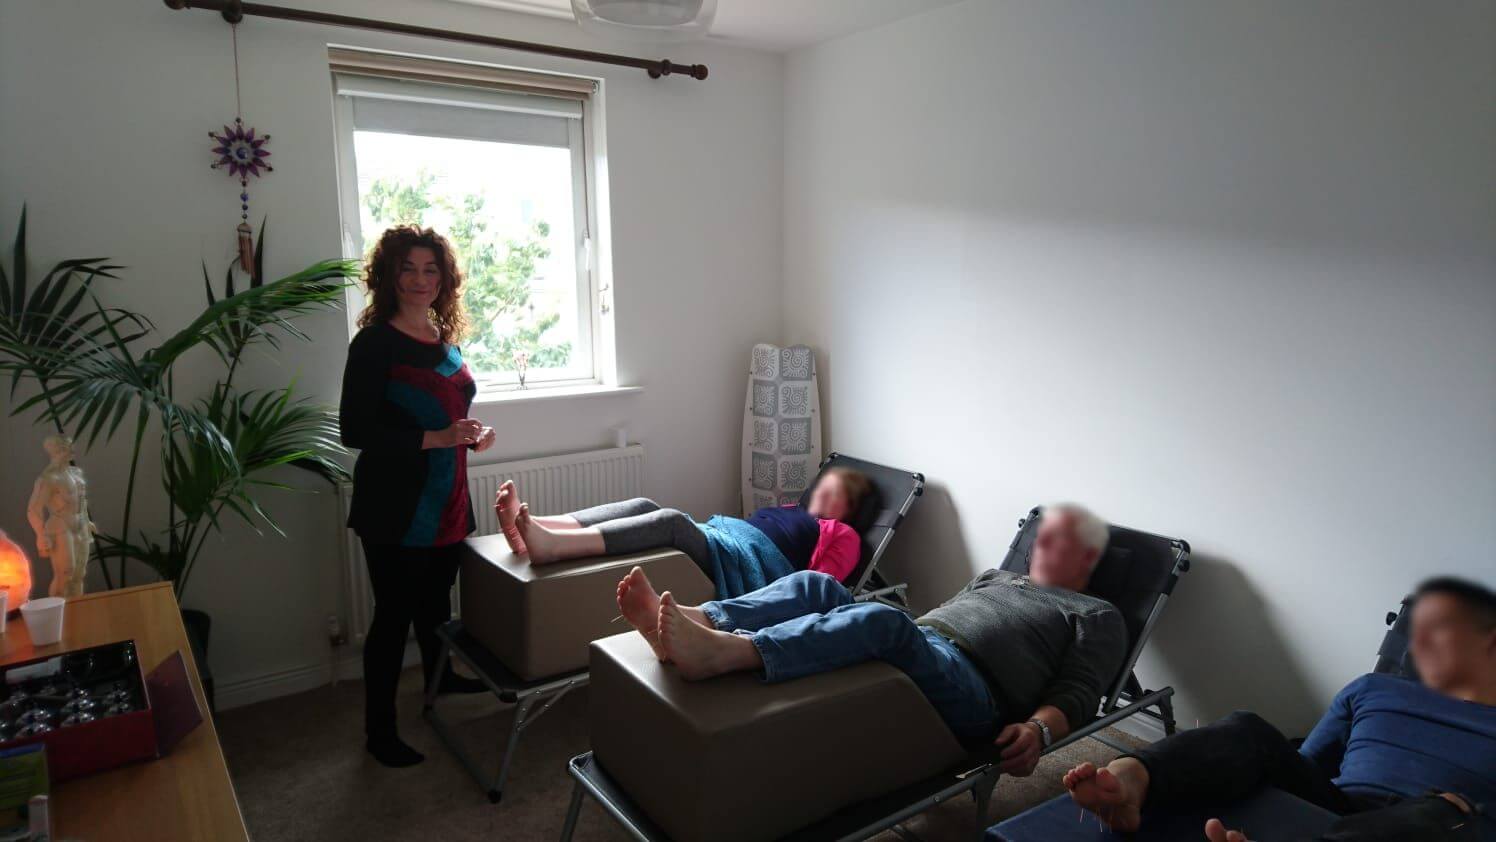 Traditional Therapies holistic acupuncture clinic, acupuncture and massage treatments for the whole family